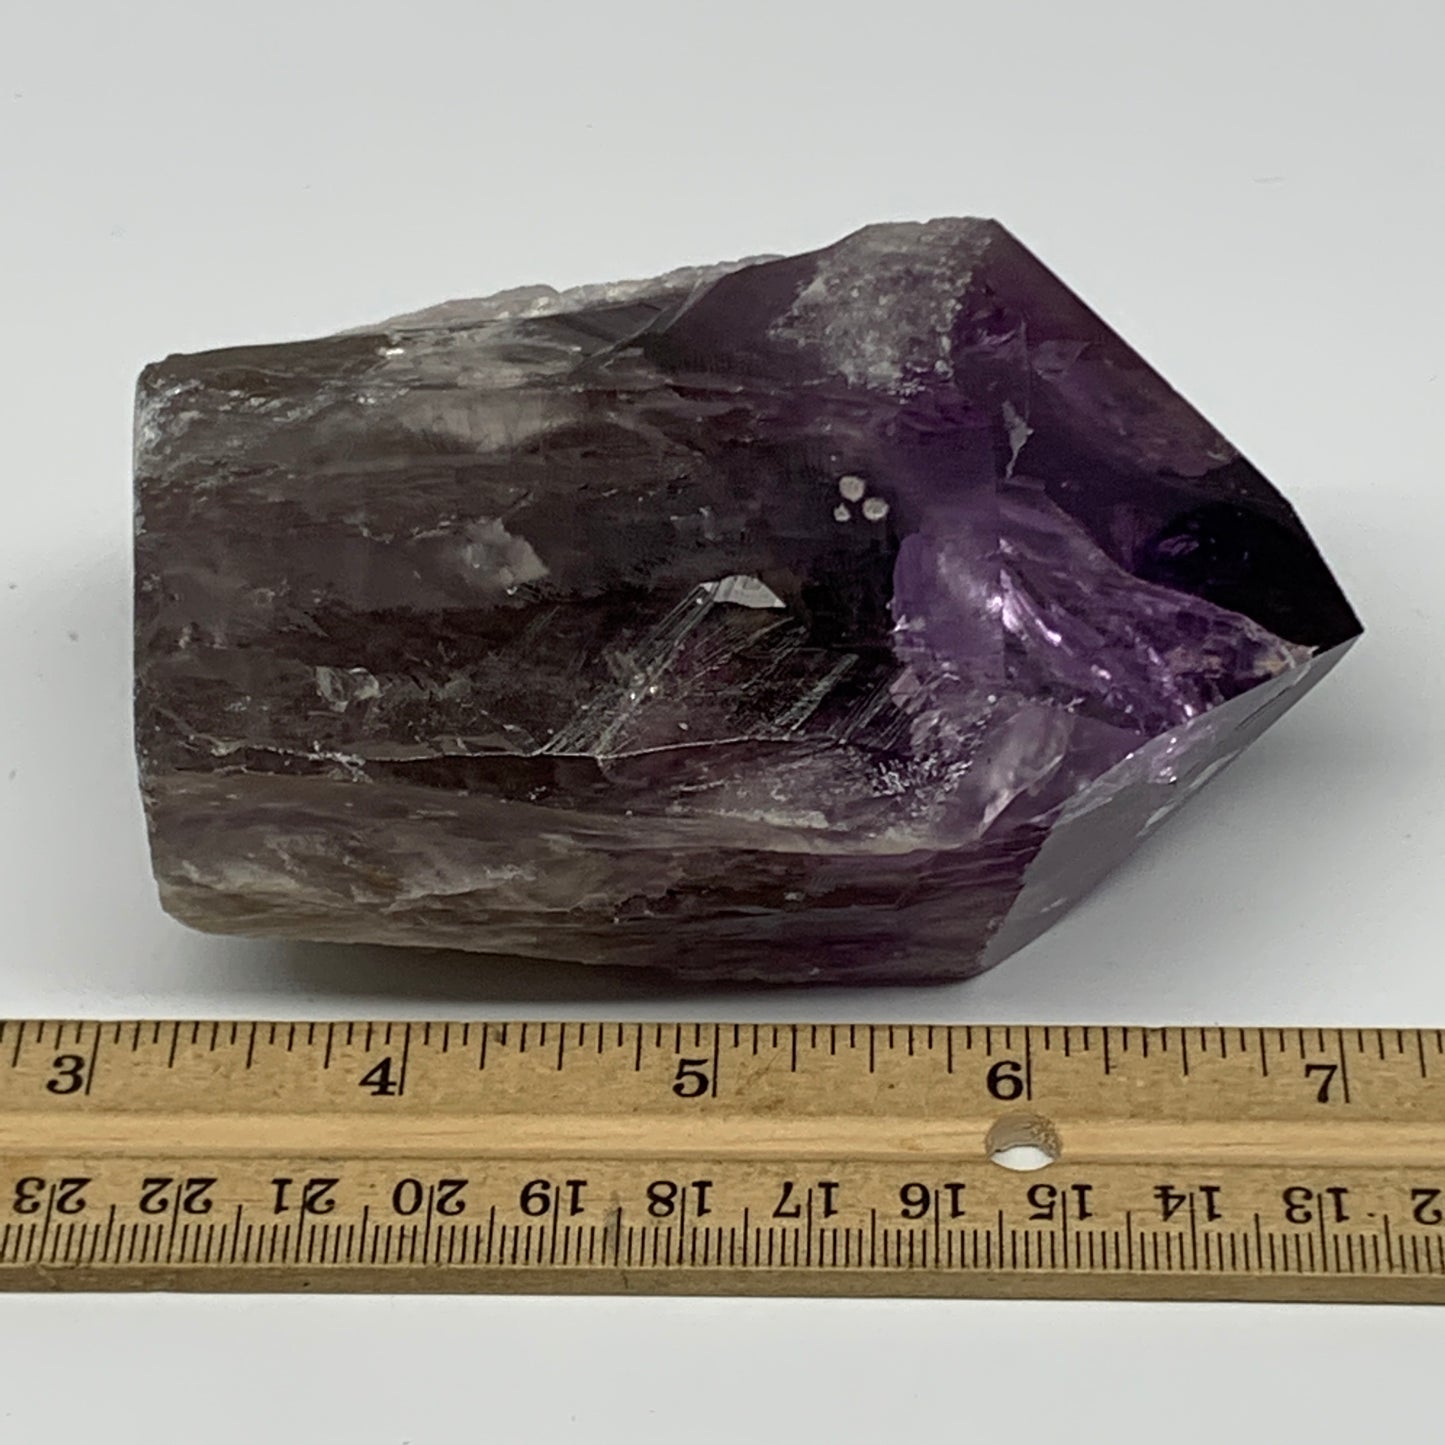 433.8g,4"x2.6"x2.1", Amethyst Point Polished Rough lower part Stands, B19085